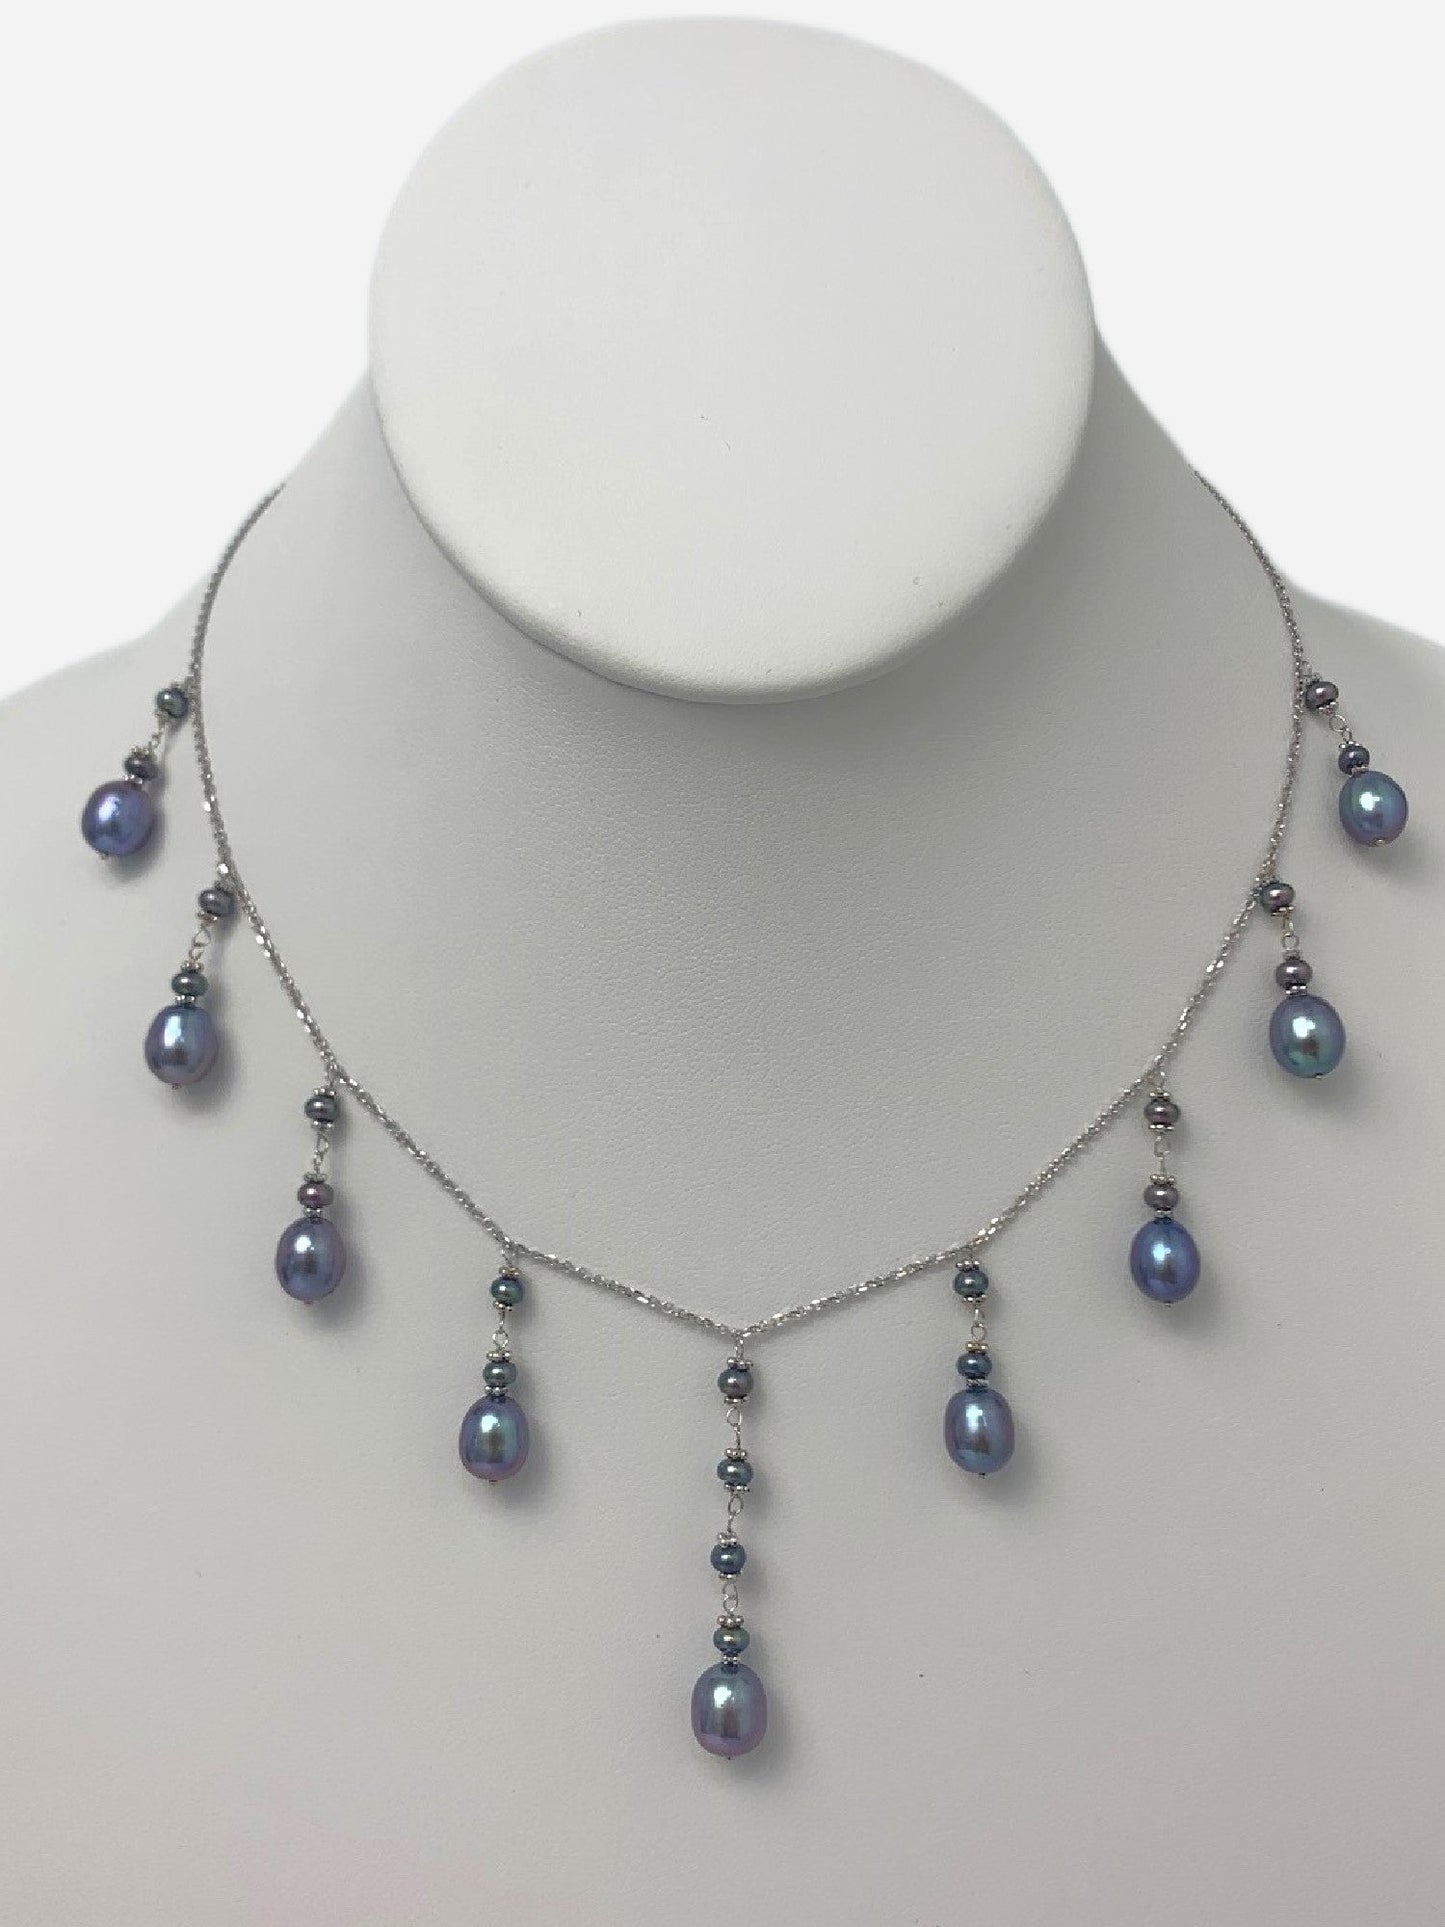 Clearance Sale! - 15" Blue Pearl Cleopatra Necklacein 14KW - NCK-007-CLEOPRL14W-BL-16